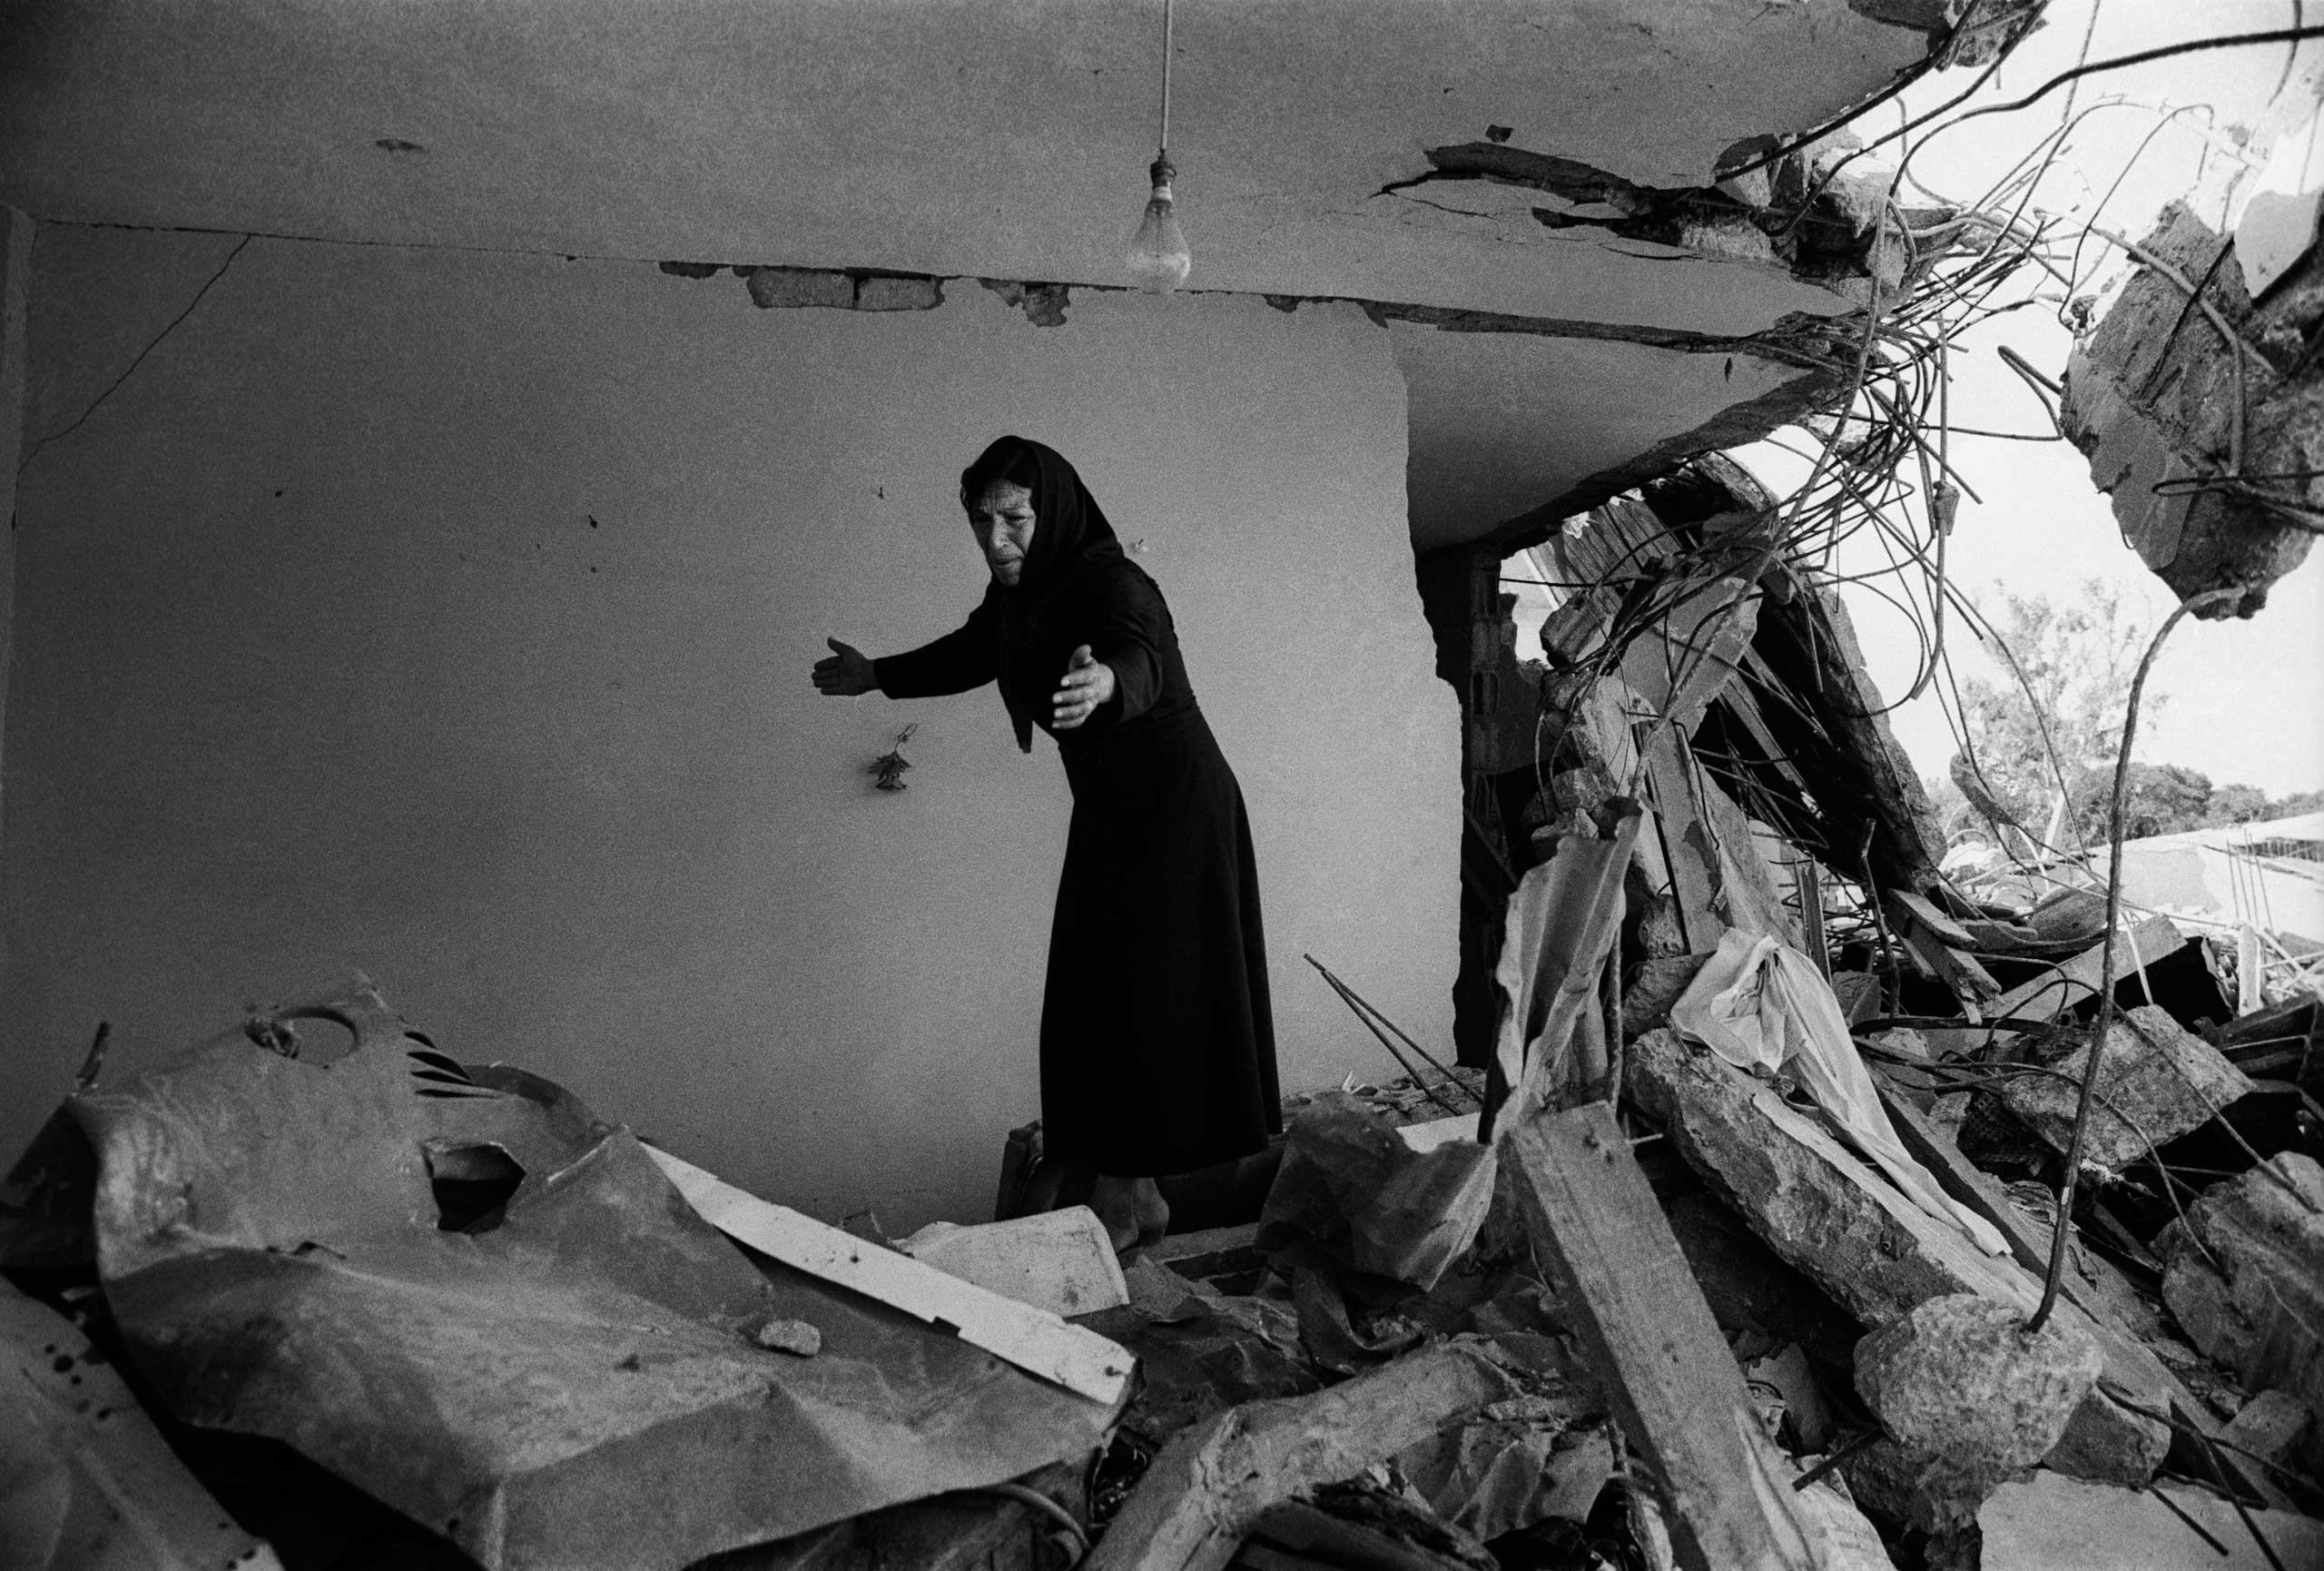 A Palestinian Woman returning to the ruins of her house in Sabra, Beirut, 1982.